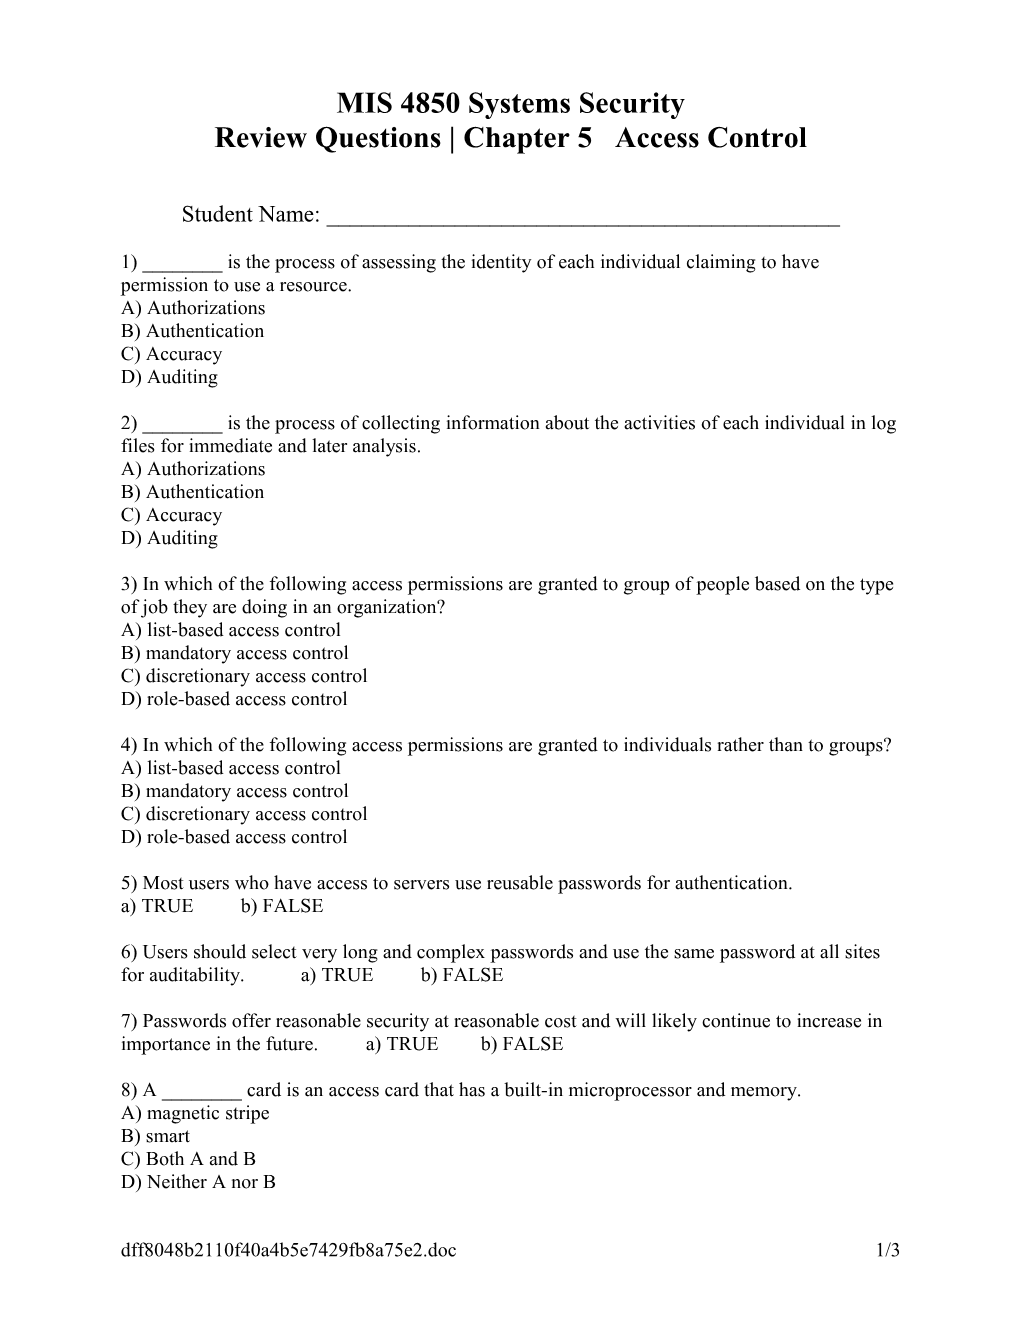 Review Questions Chapter 5 Access Control